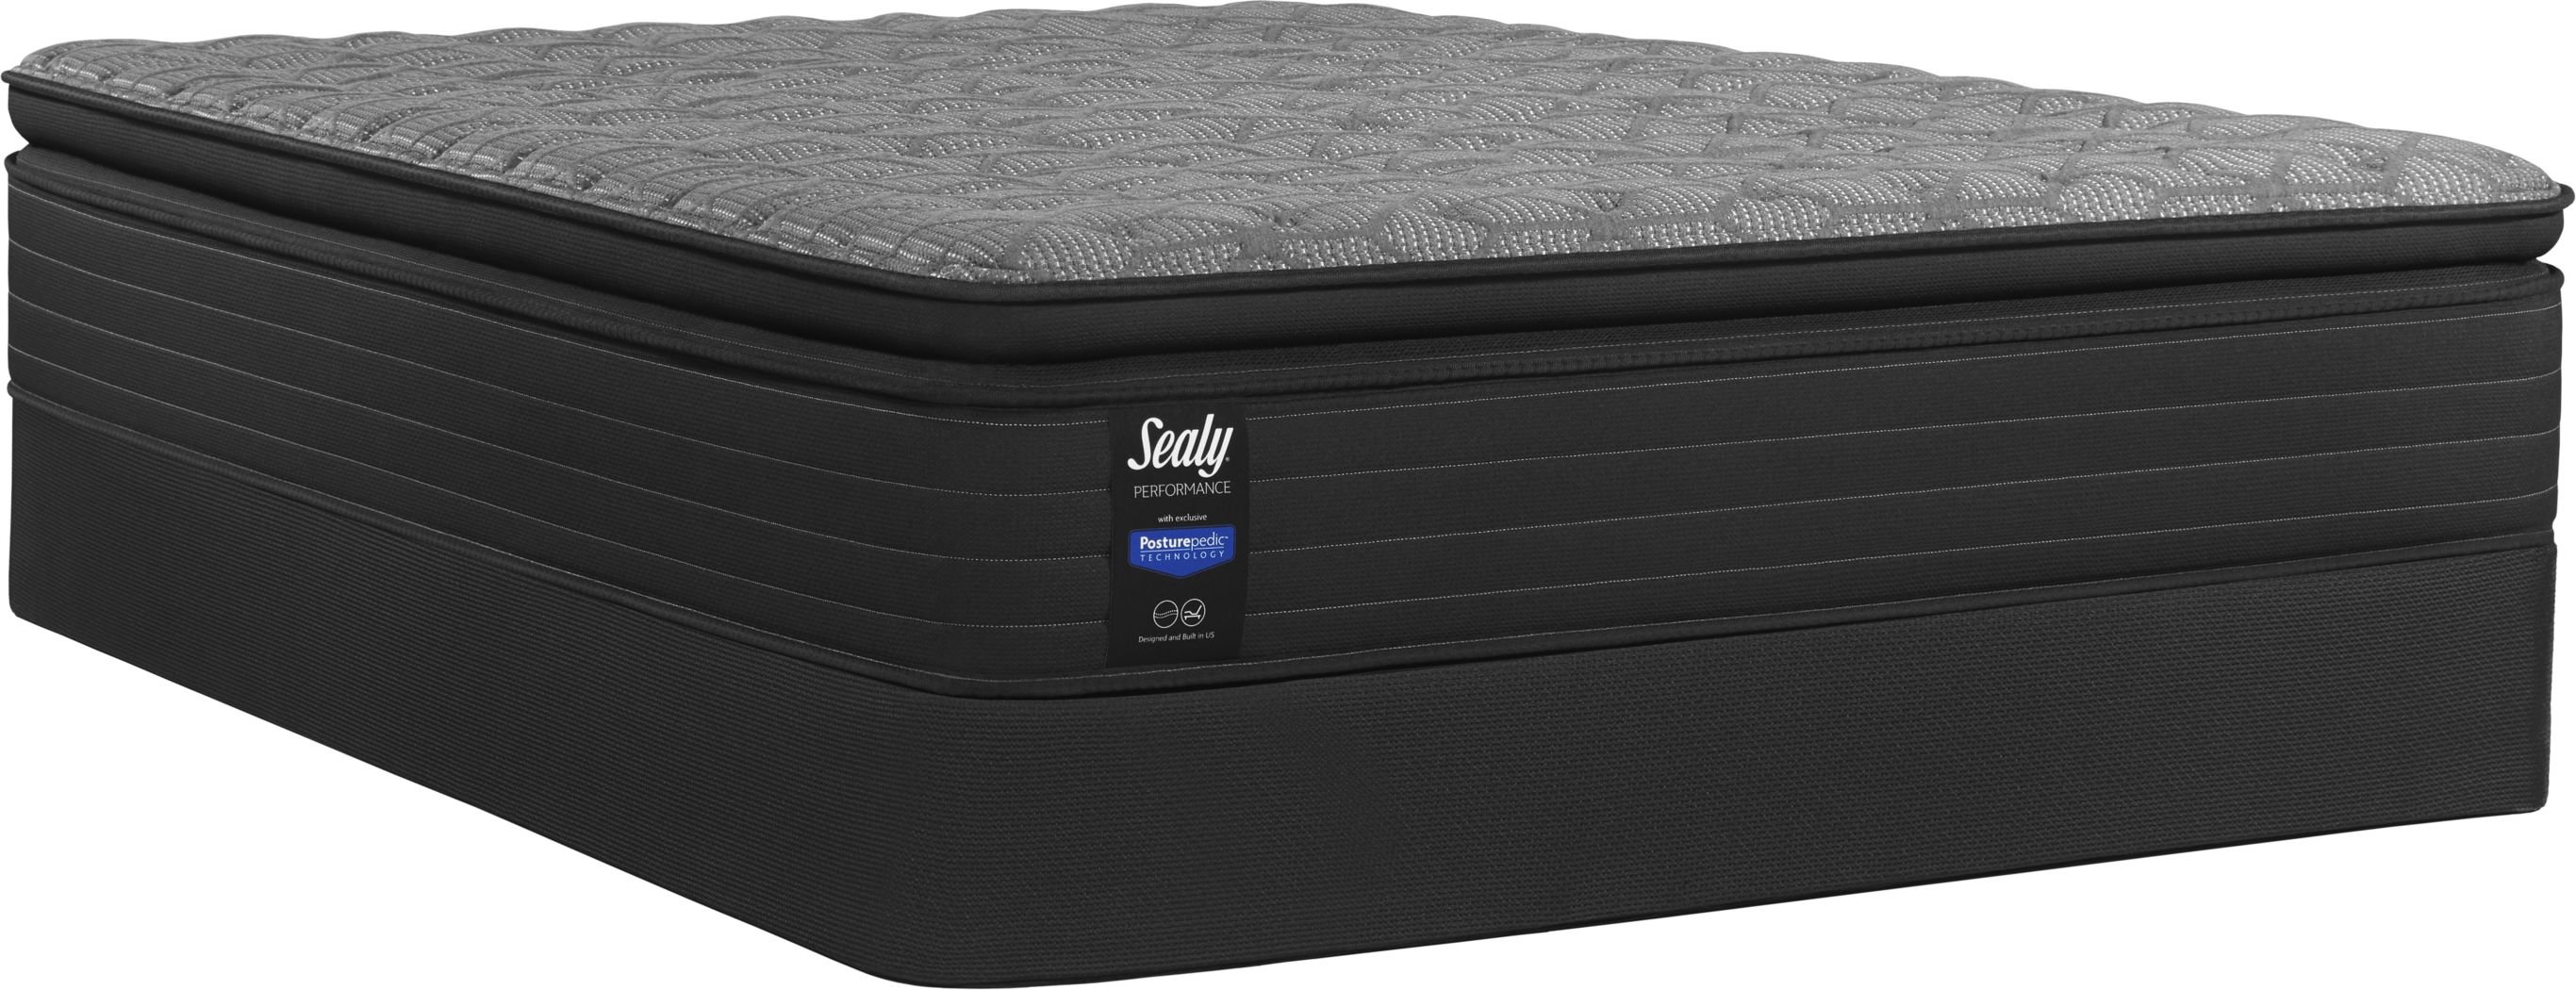 sealy to go mattress jcpenney